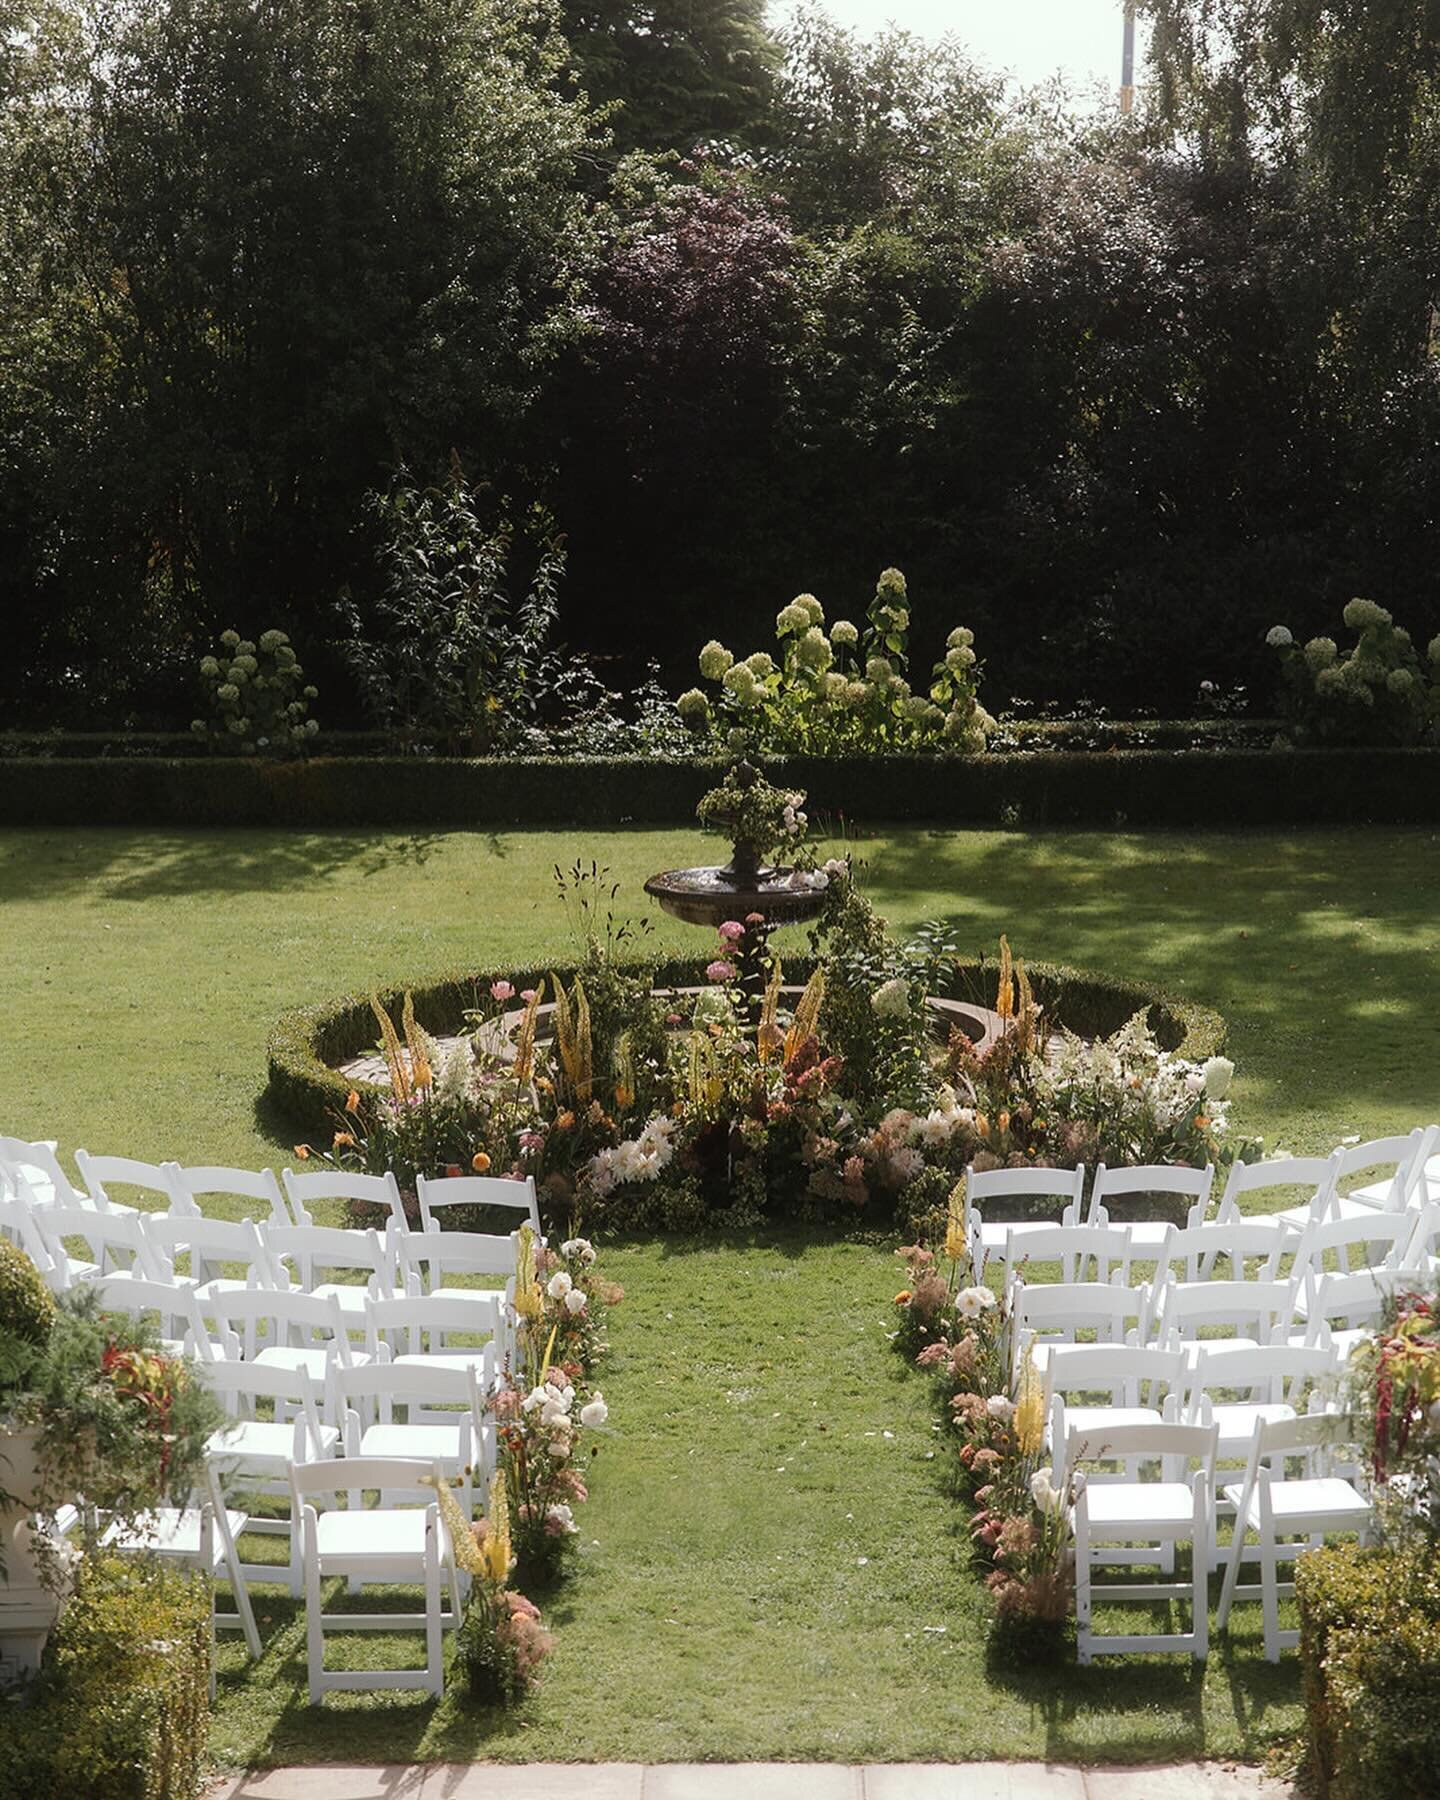 Dreamiest summer afternoon with the dreamiest couple 

Photos @chriscopelandweddings 
Planning &amp; styling @loveandgatherings 
Florals @thestudioflorist 

#destinationwedding #destinationweddingplanner #irishweddingplanner #destinationweddingirelan